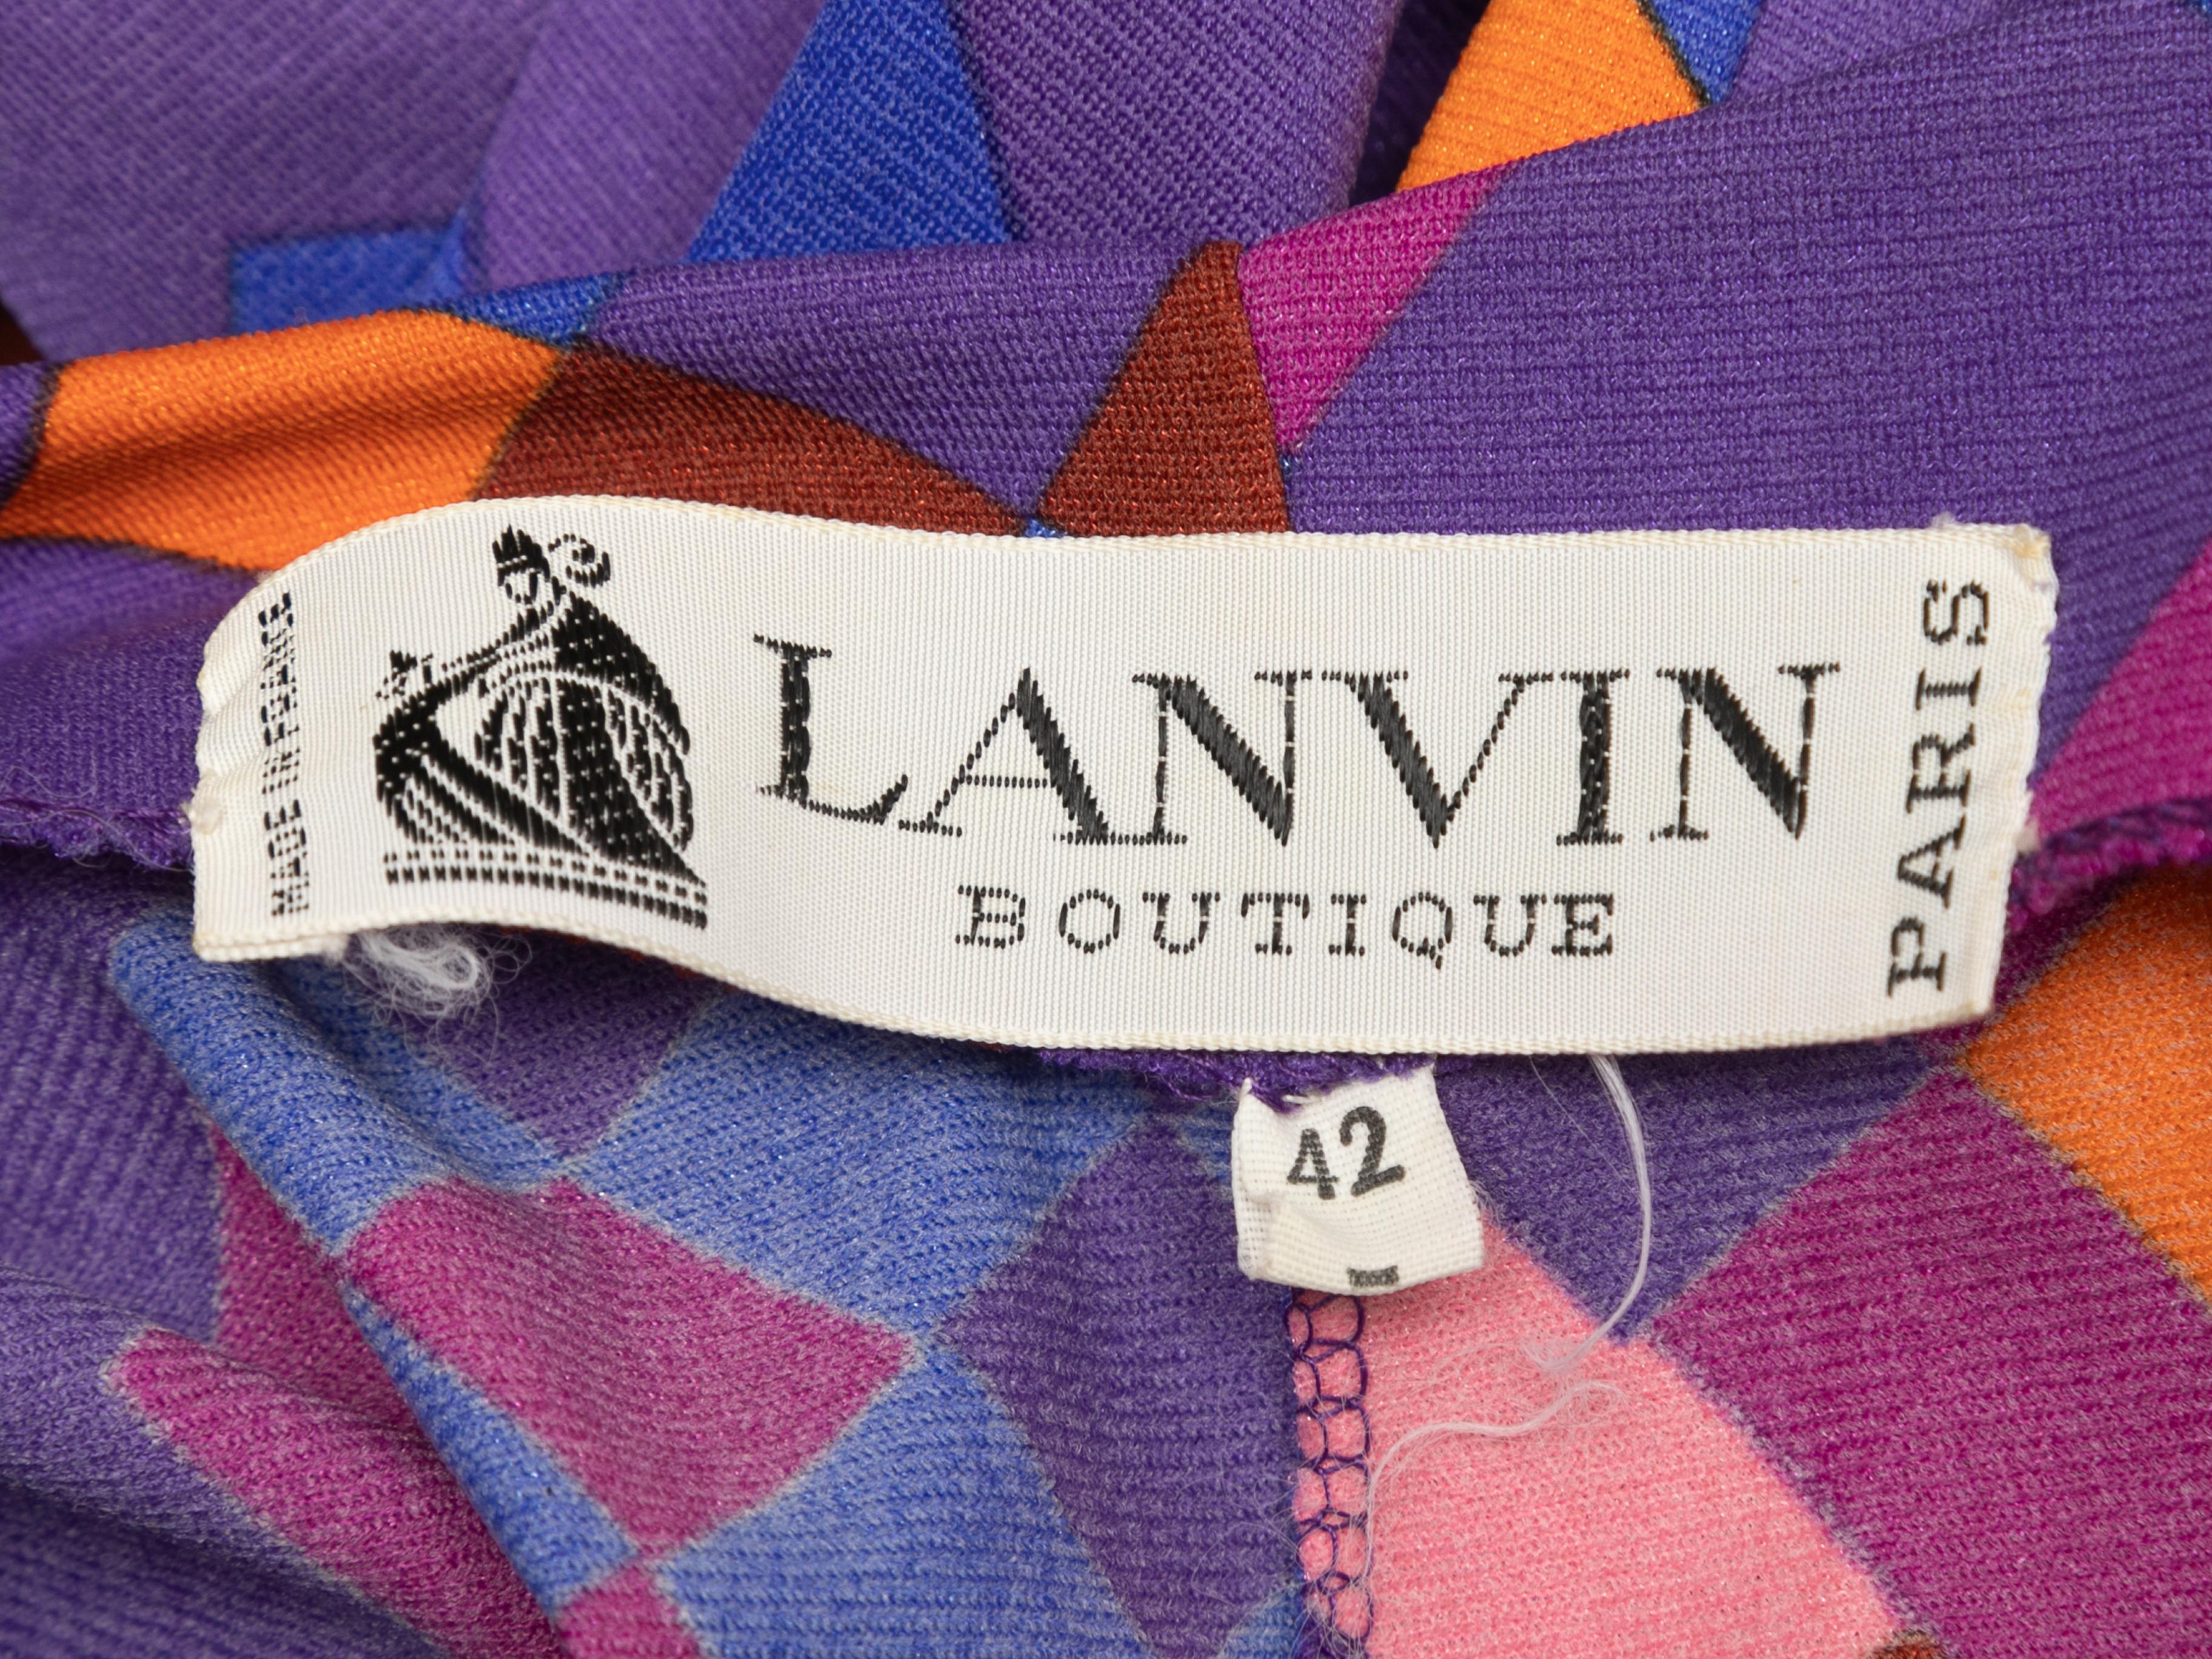 Vintage purple and multicolor geometric print sleeveless maxi dress by Lanvin. Crew neck. Optional waist tie. Button closures at front. 38